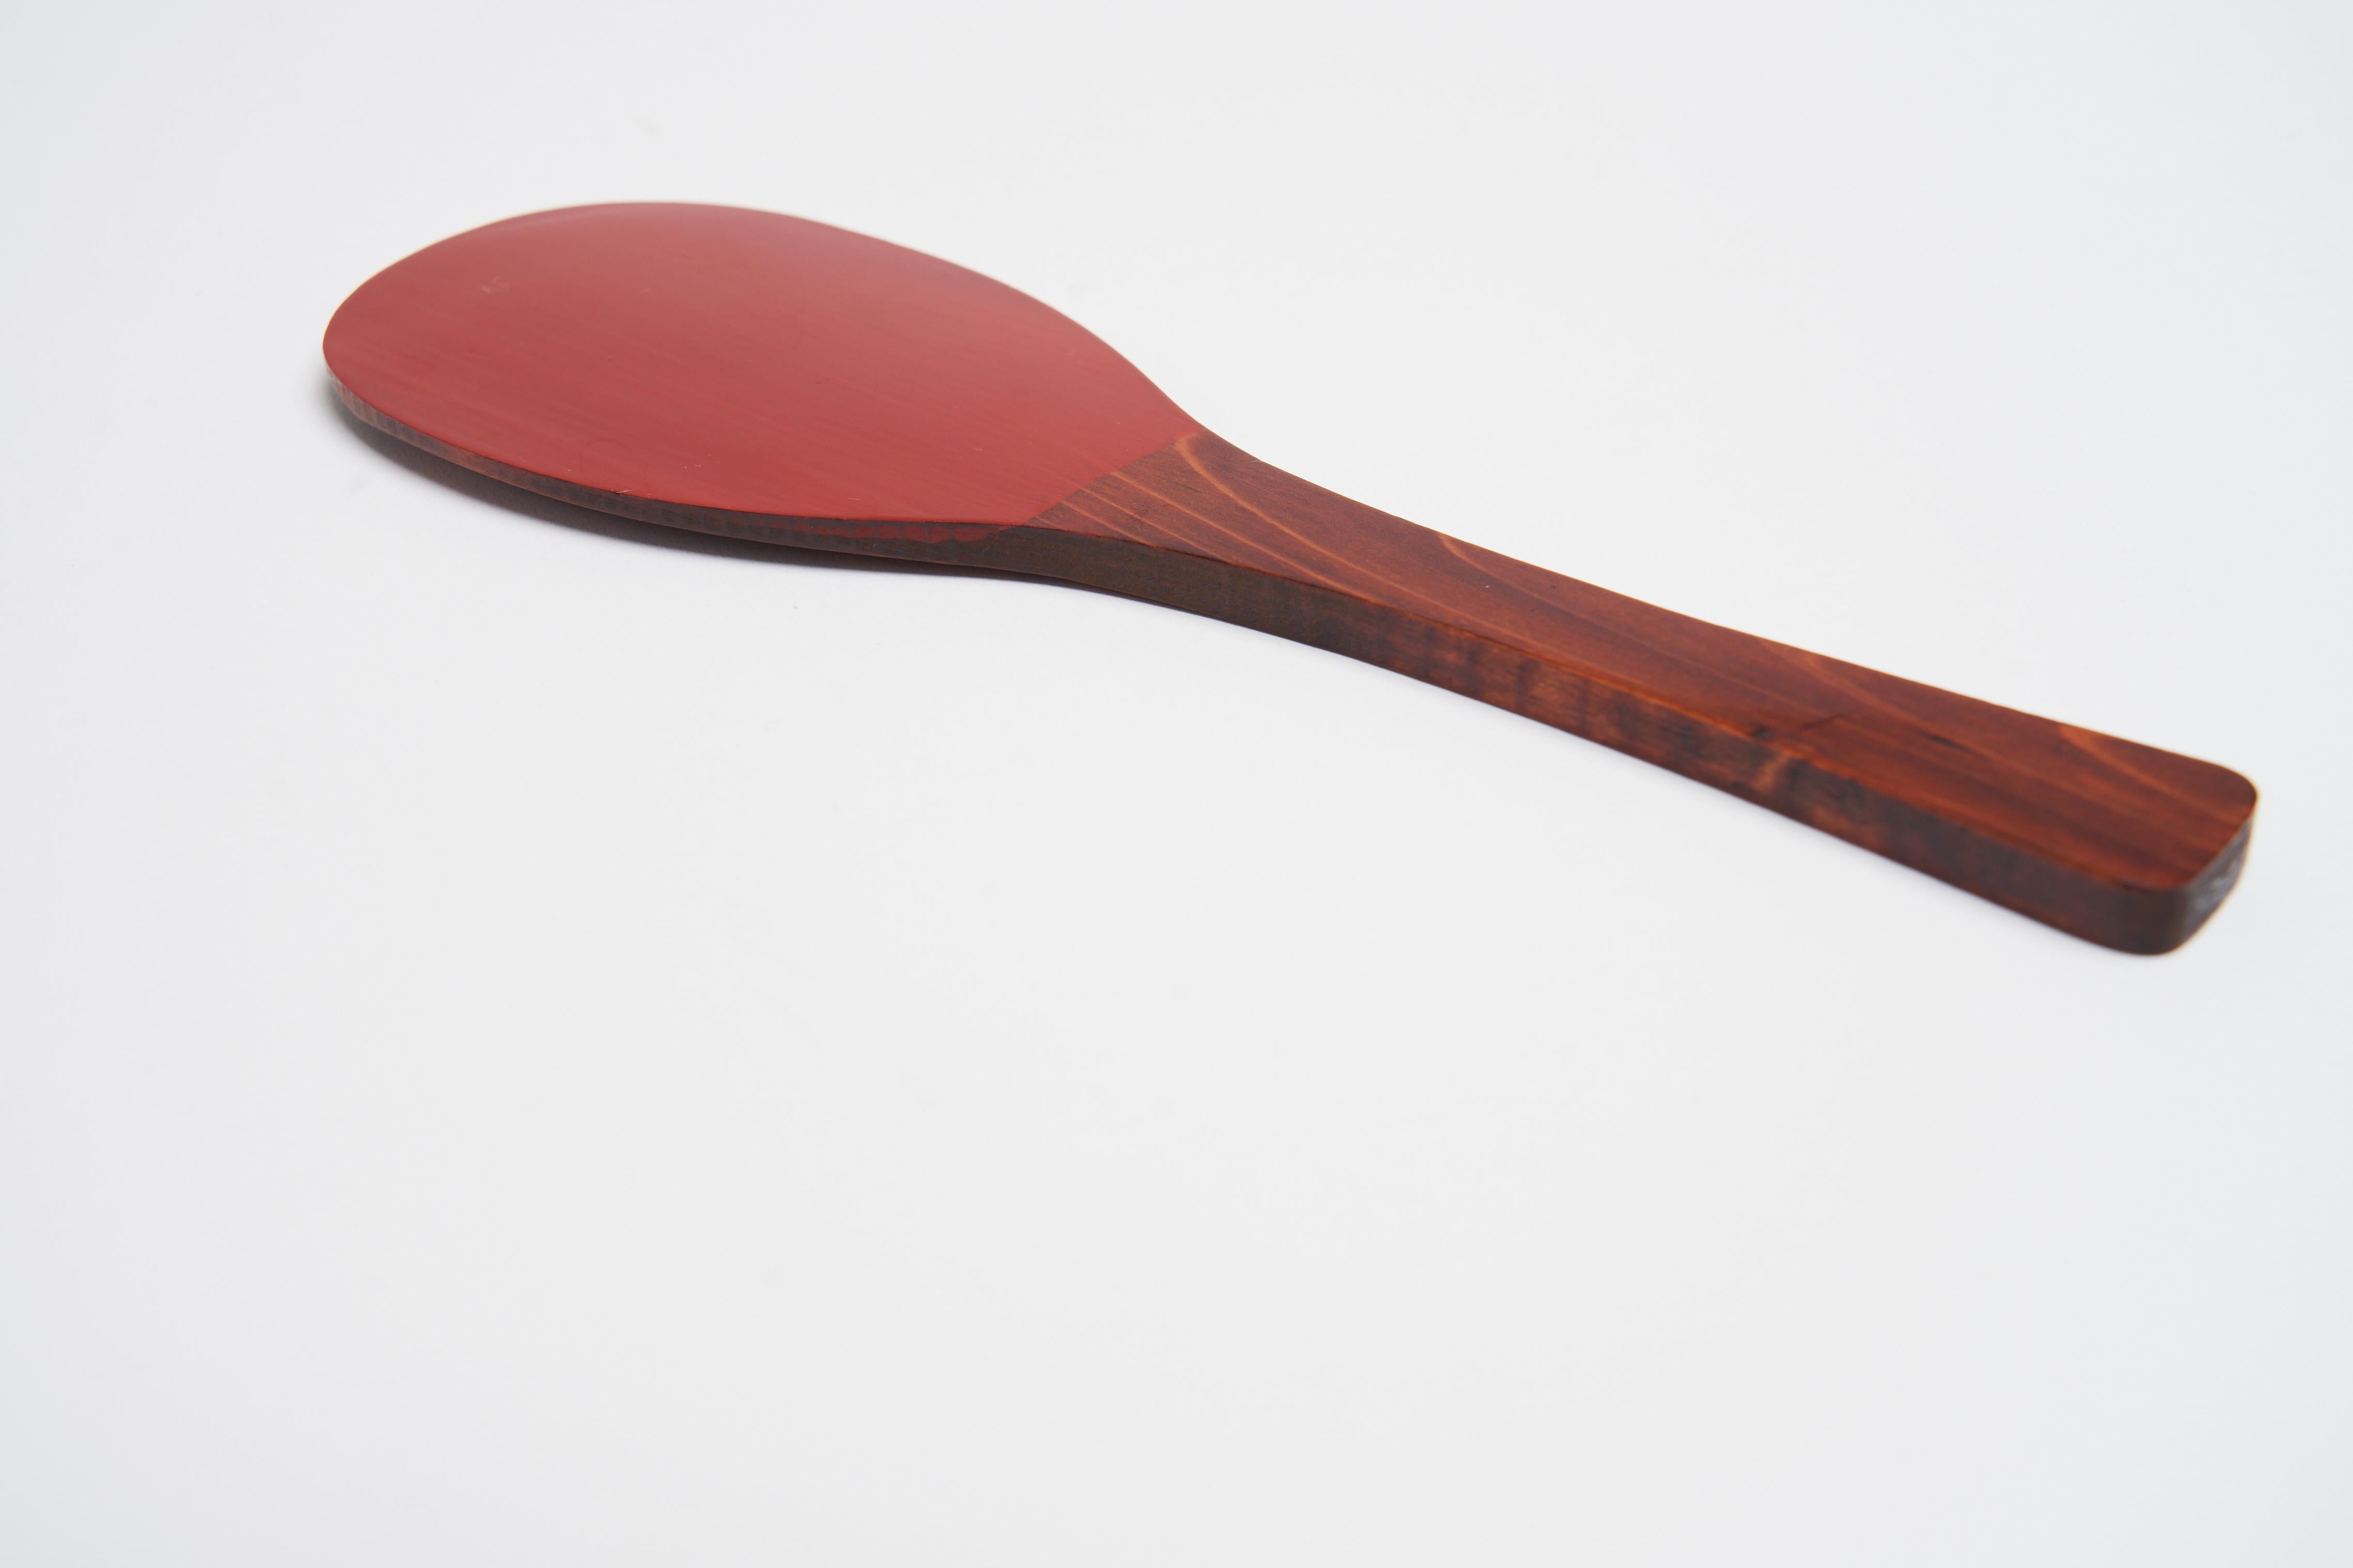 This incredibly beautiful and functional red lacquered hardwood spoon is truly one of a kind. The deep matte like finish of the red lacquer over the wood make this something worth owning. 

The details in the wood, as you can see - sharp angles that